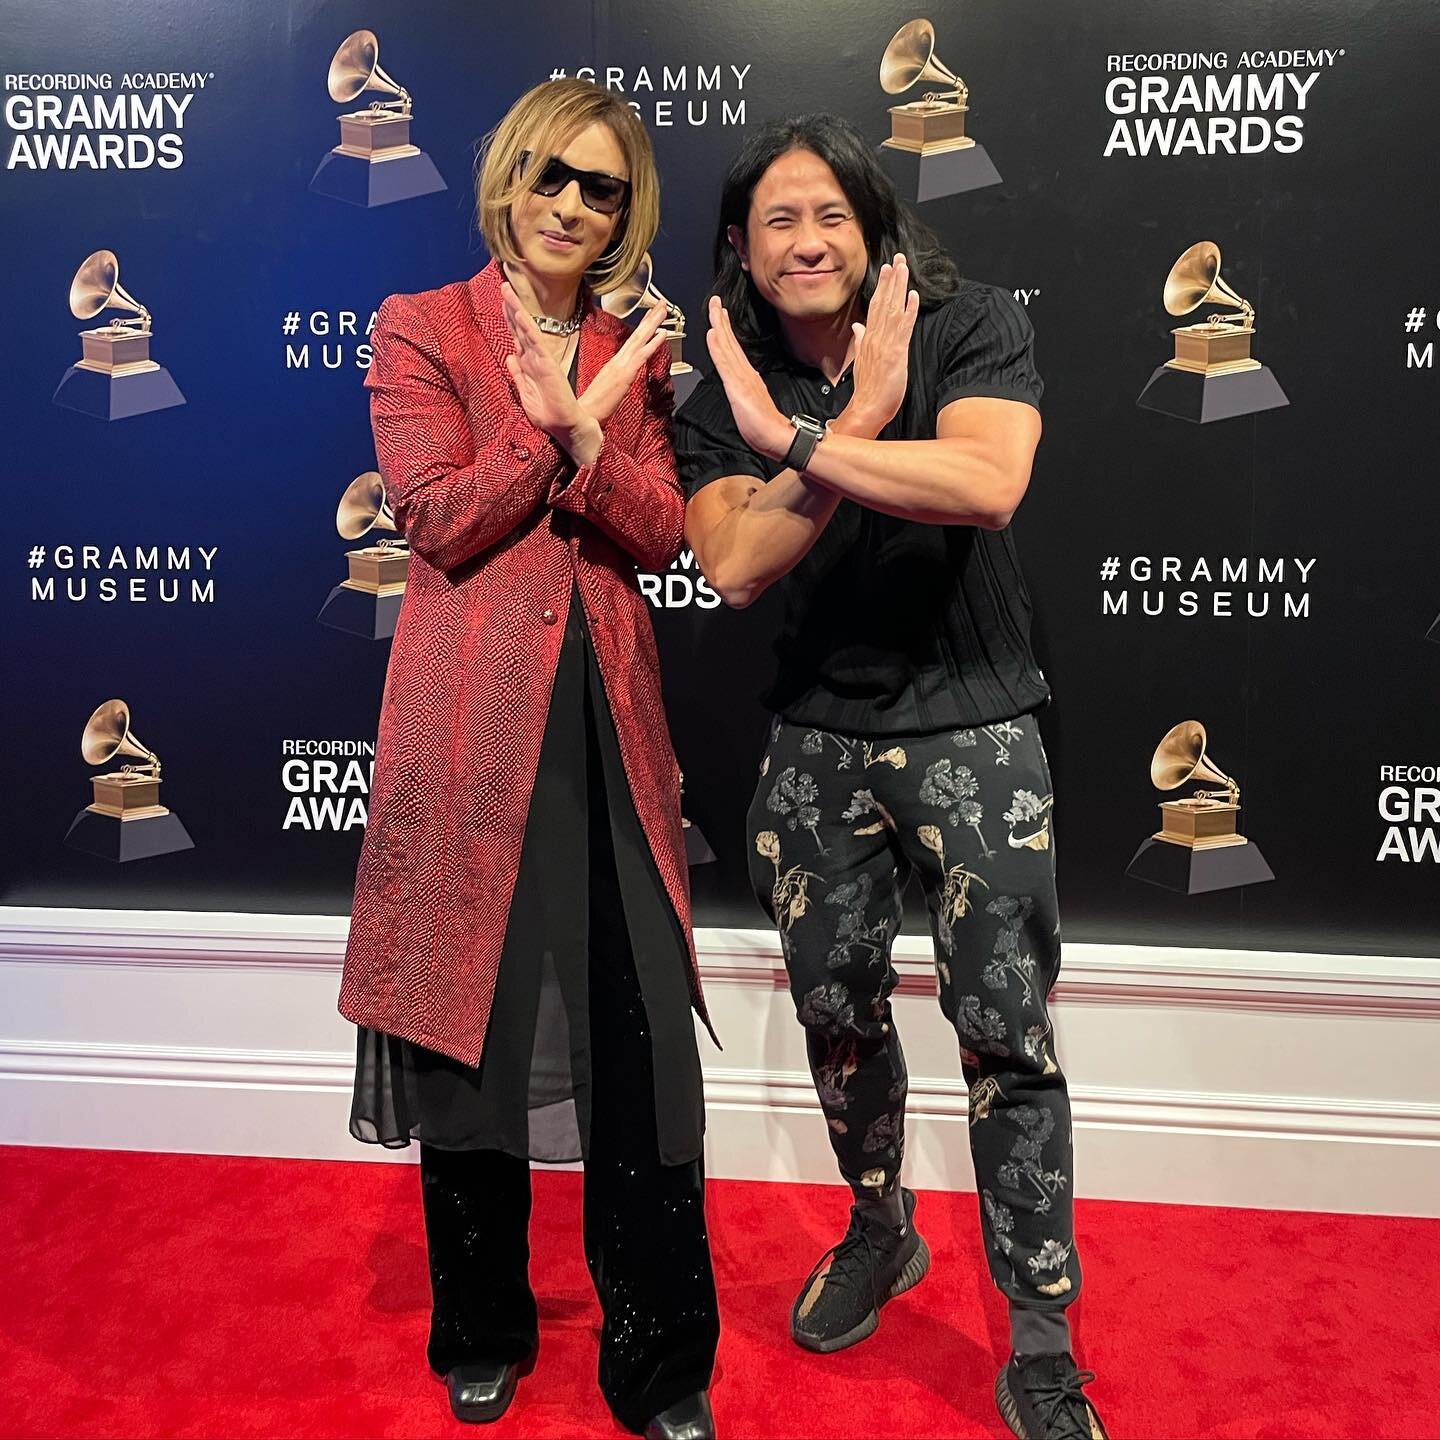 Had a lovely time music directing for @yoshikiofficial classical tour announcement event at the Grammy Museum today! #yoshiki #japan #grammymuseum #grammys #classical #arranger #orchestra